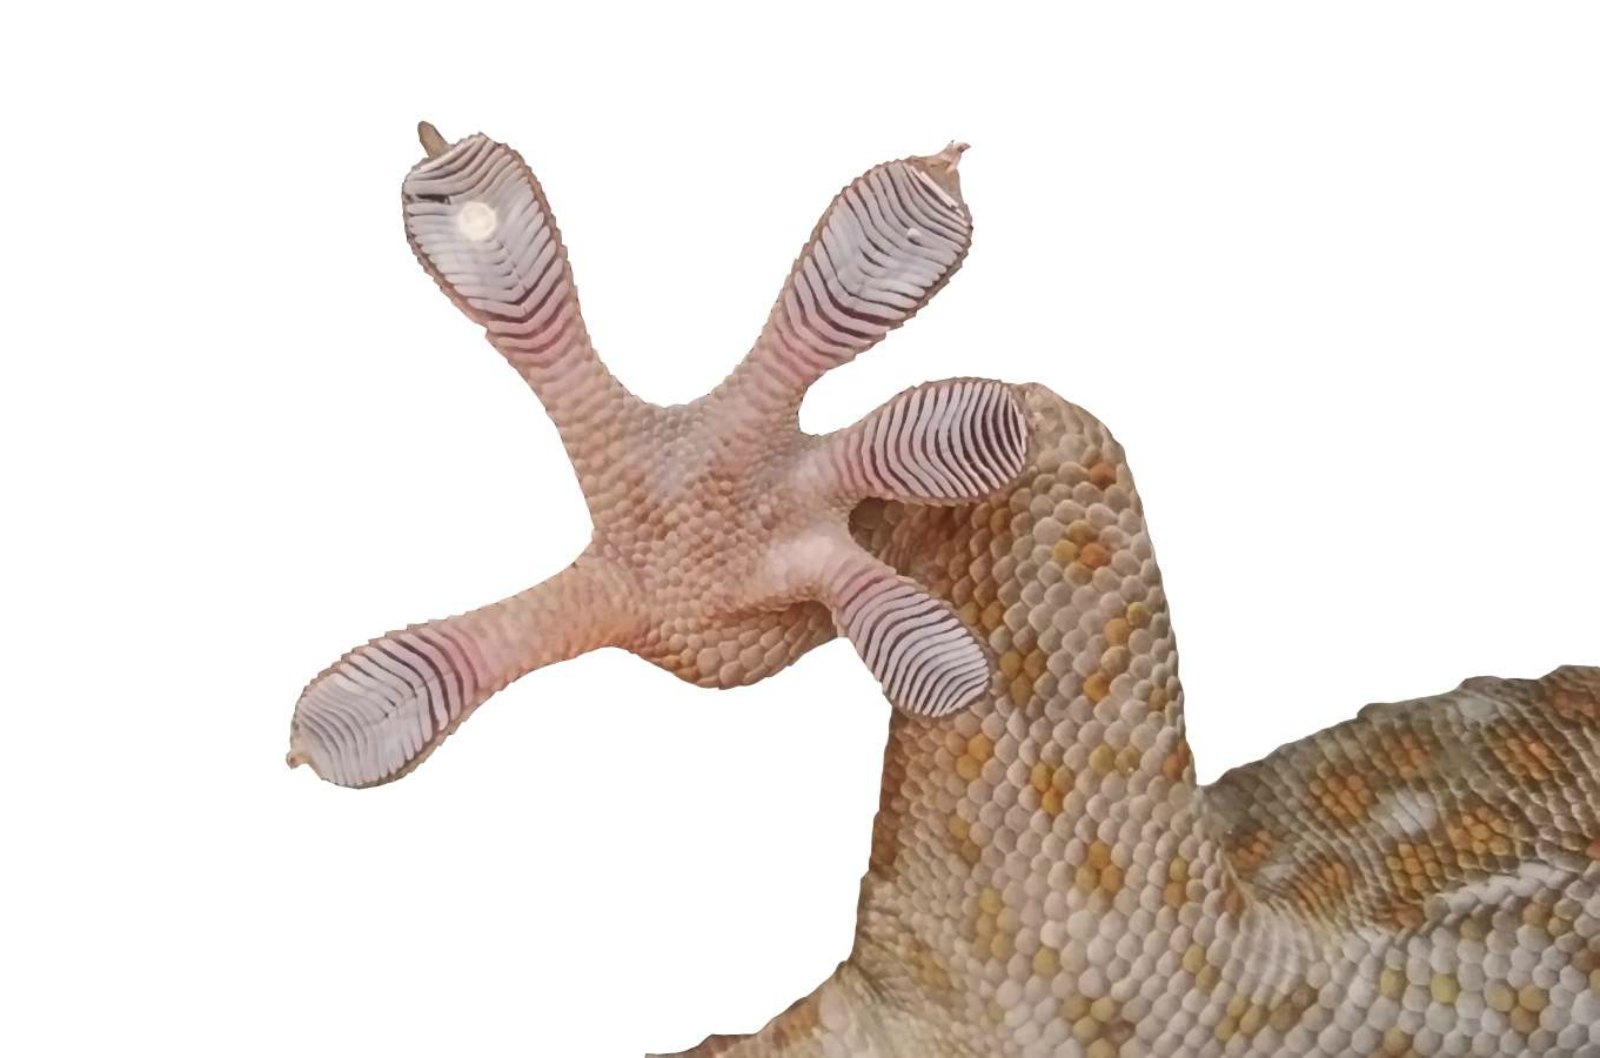 Wet/Dry Adhesive Mimics the Complex Structure of a Gecko’s Foot